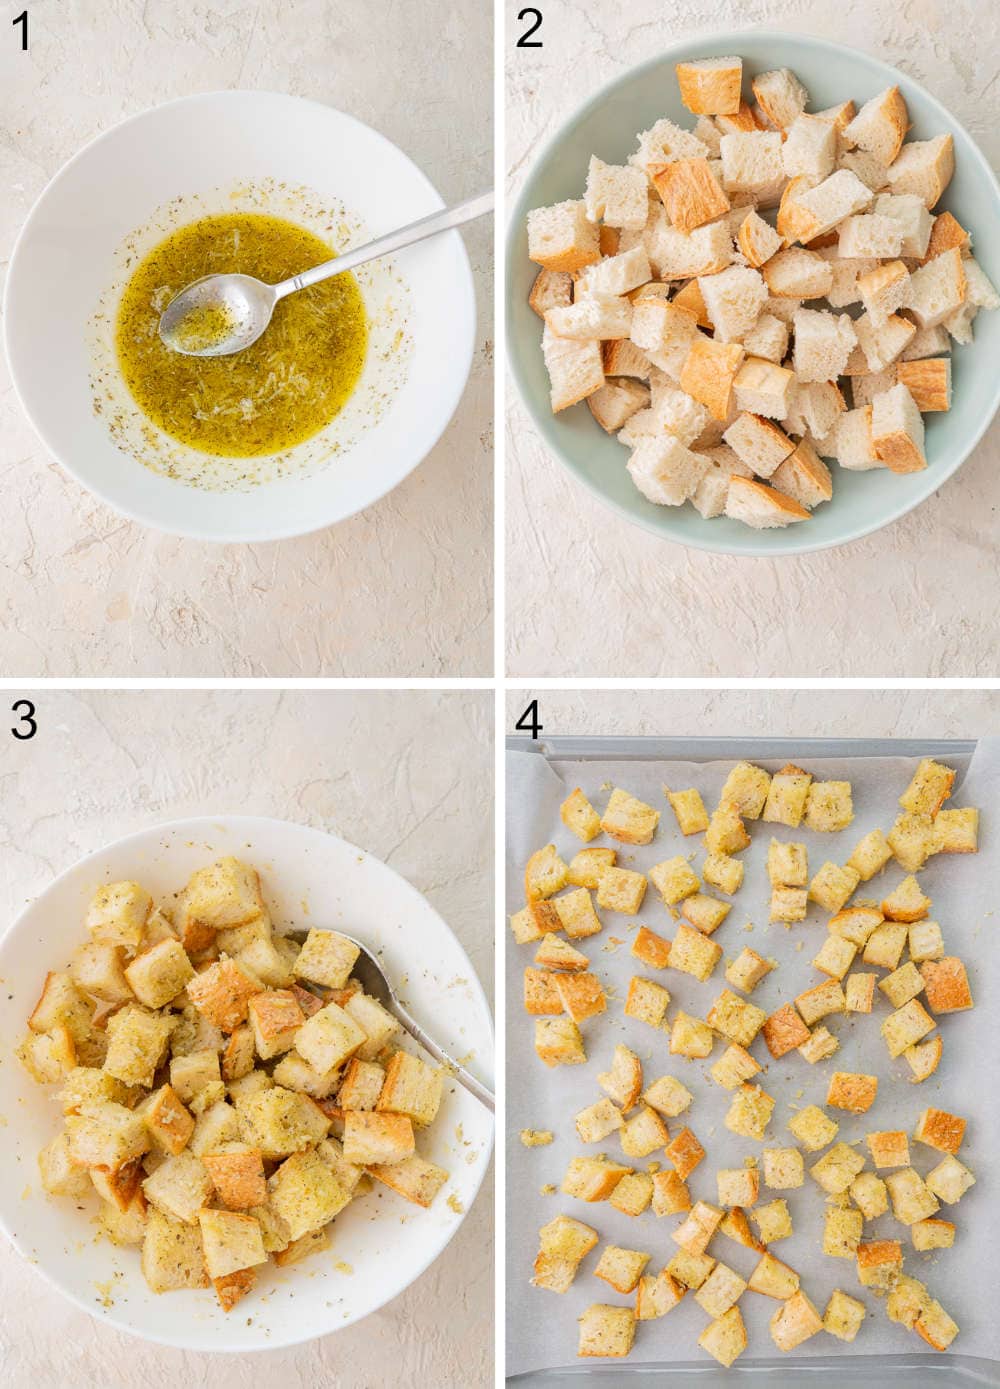 A collage of 4 photos showing how to make homemade croutons.